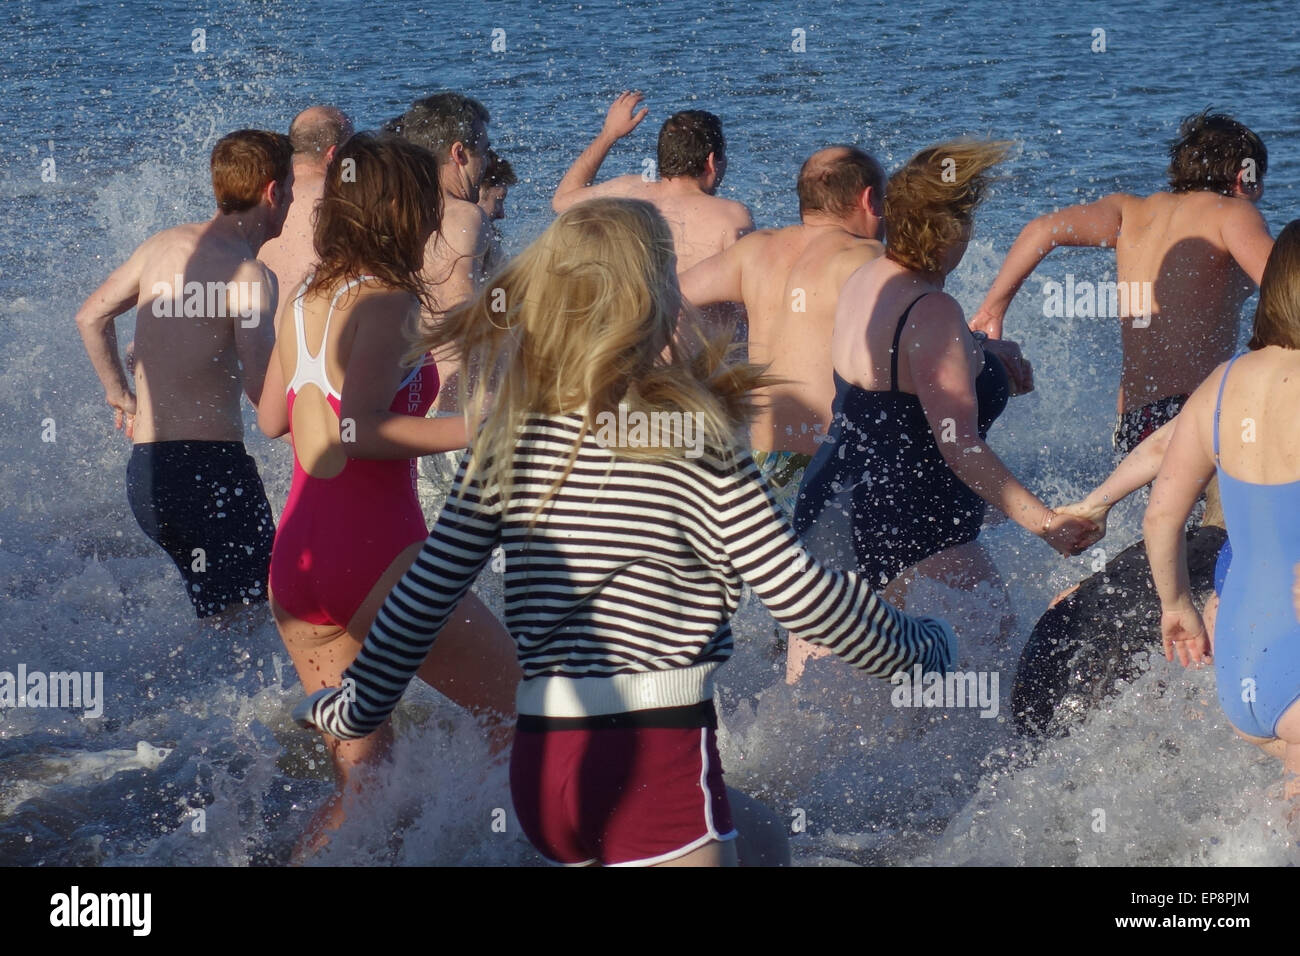 Loony Dook, West Beach, North Berwick Banque D'Images